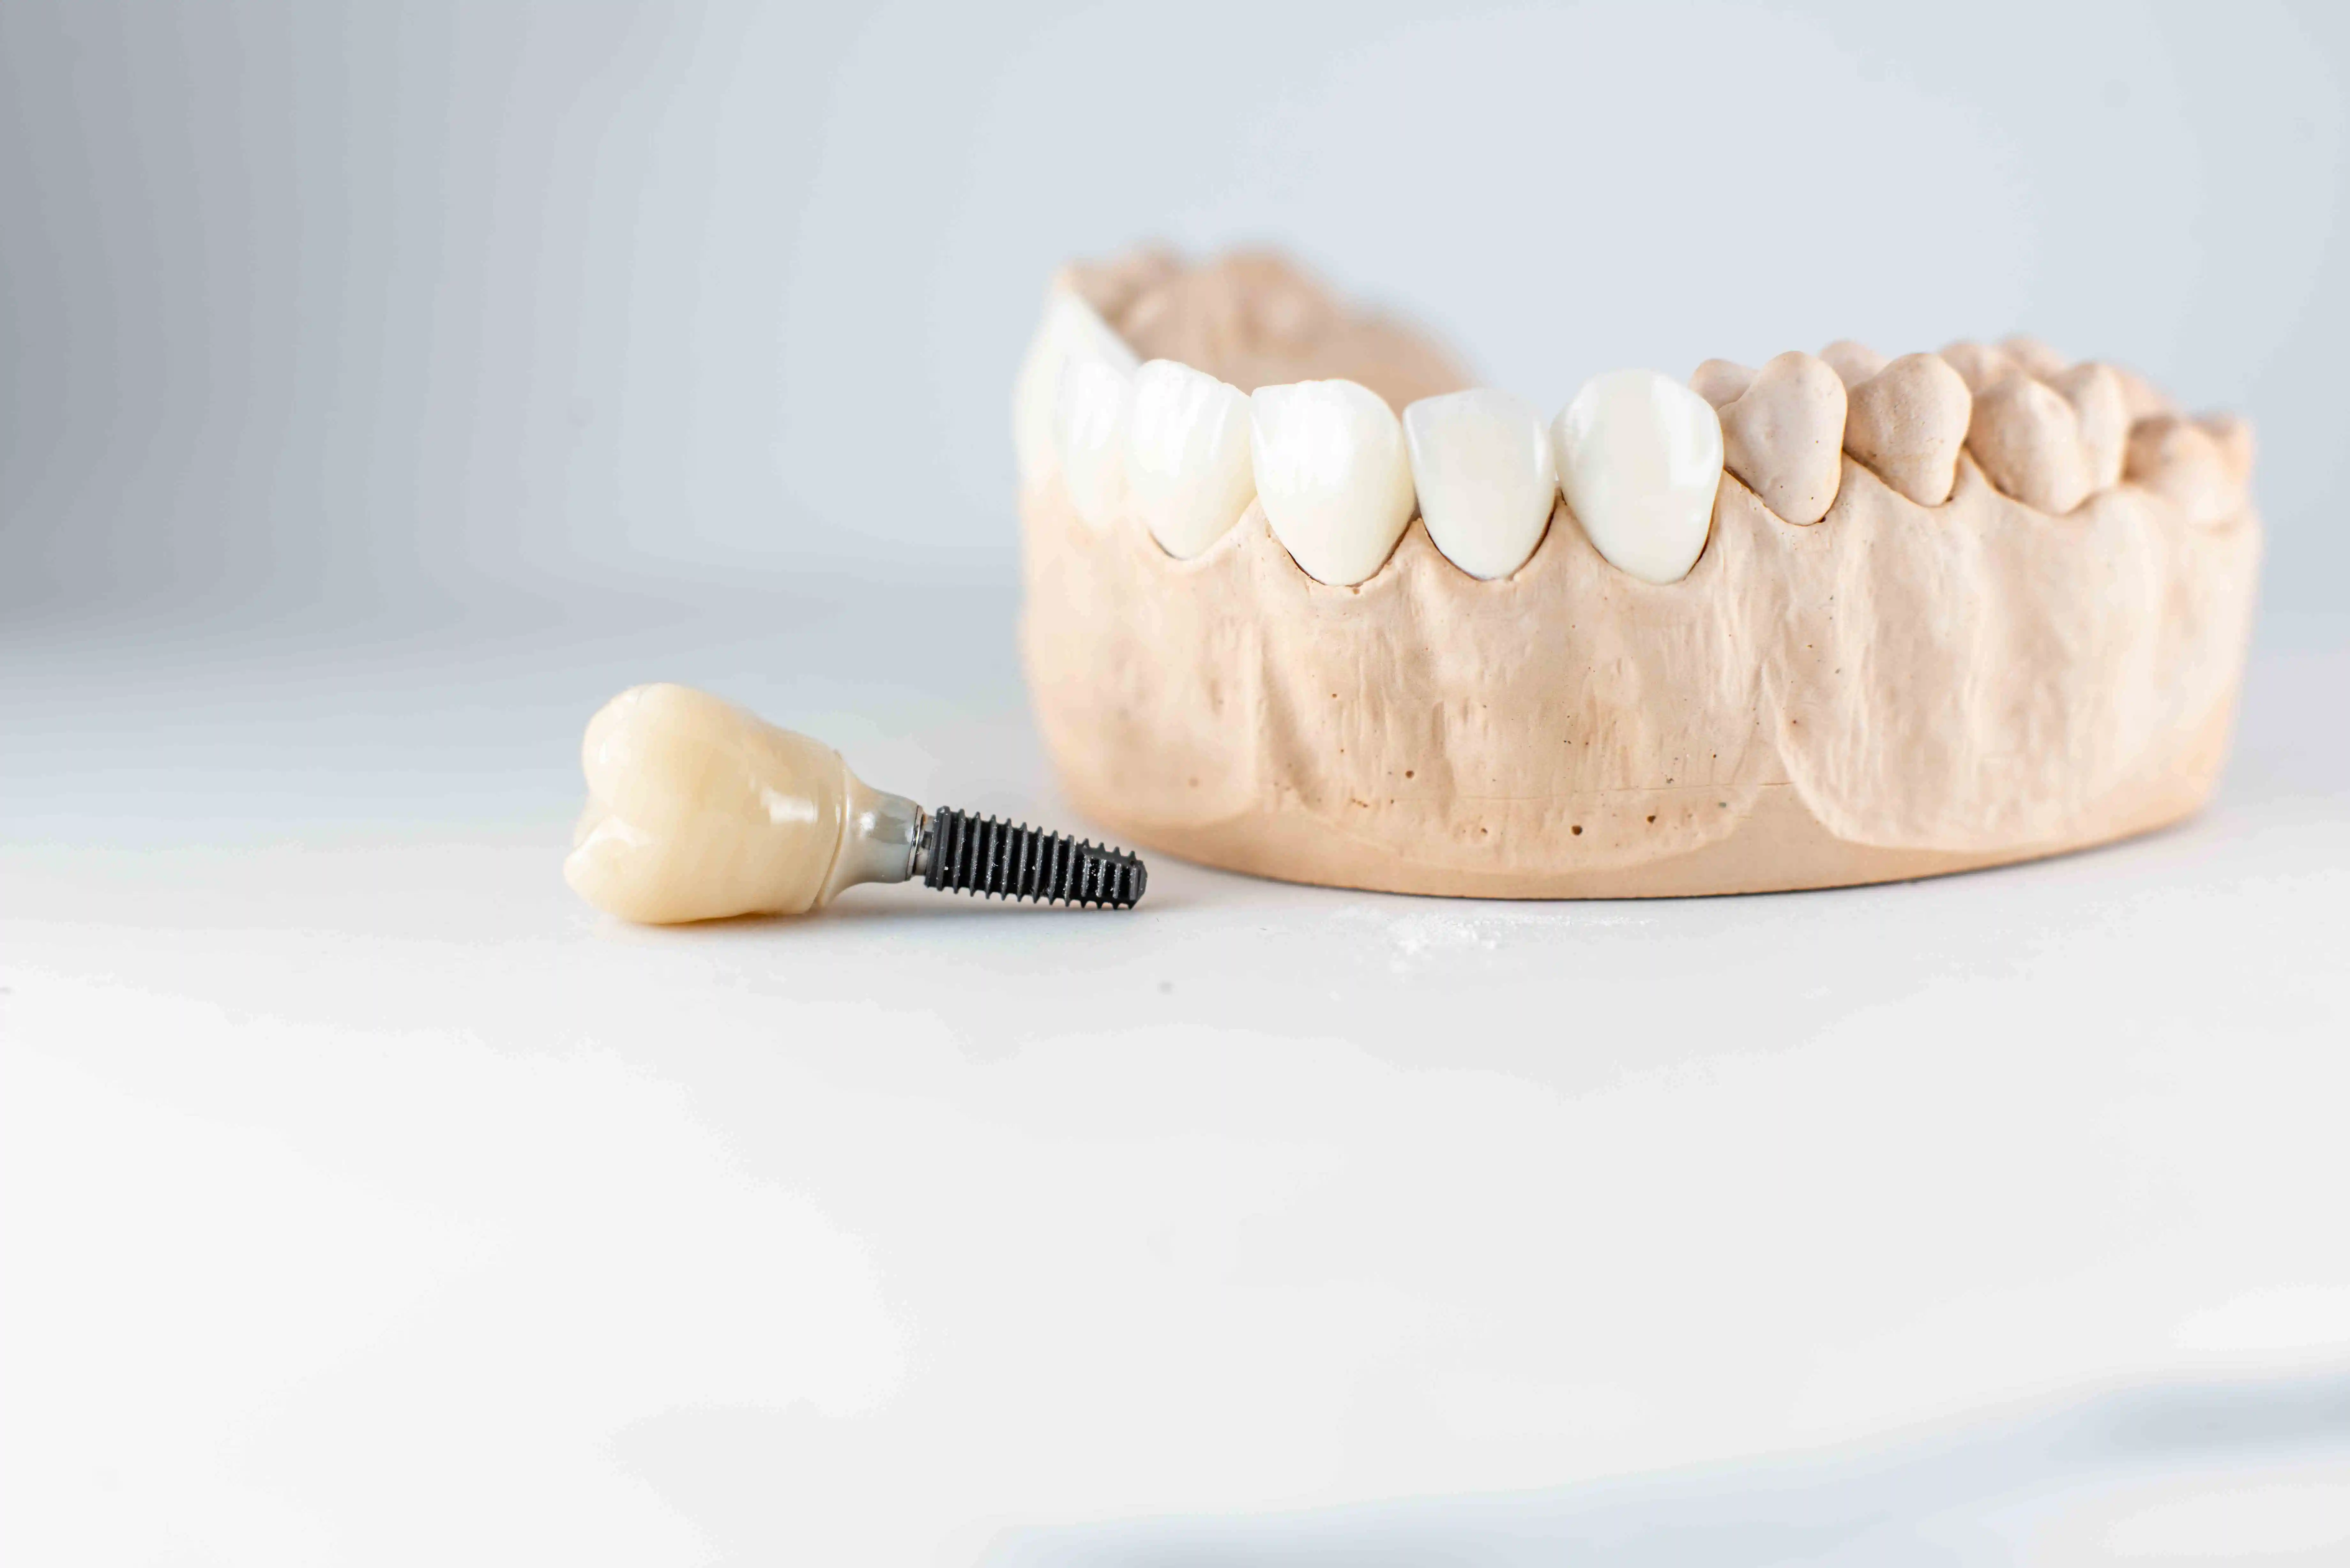 Reasons to Get a Dental Implant